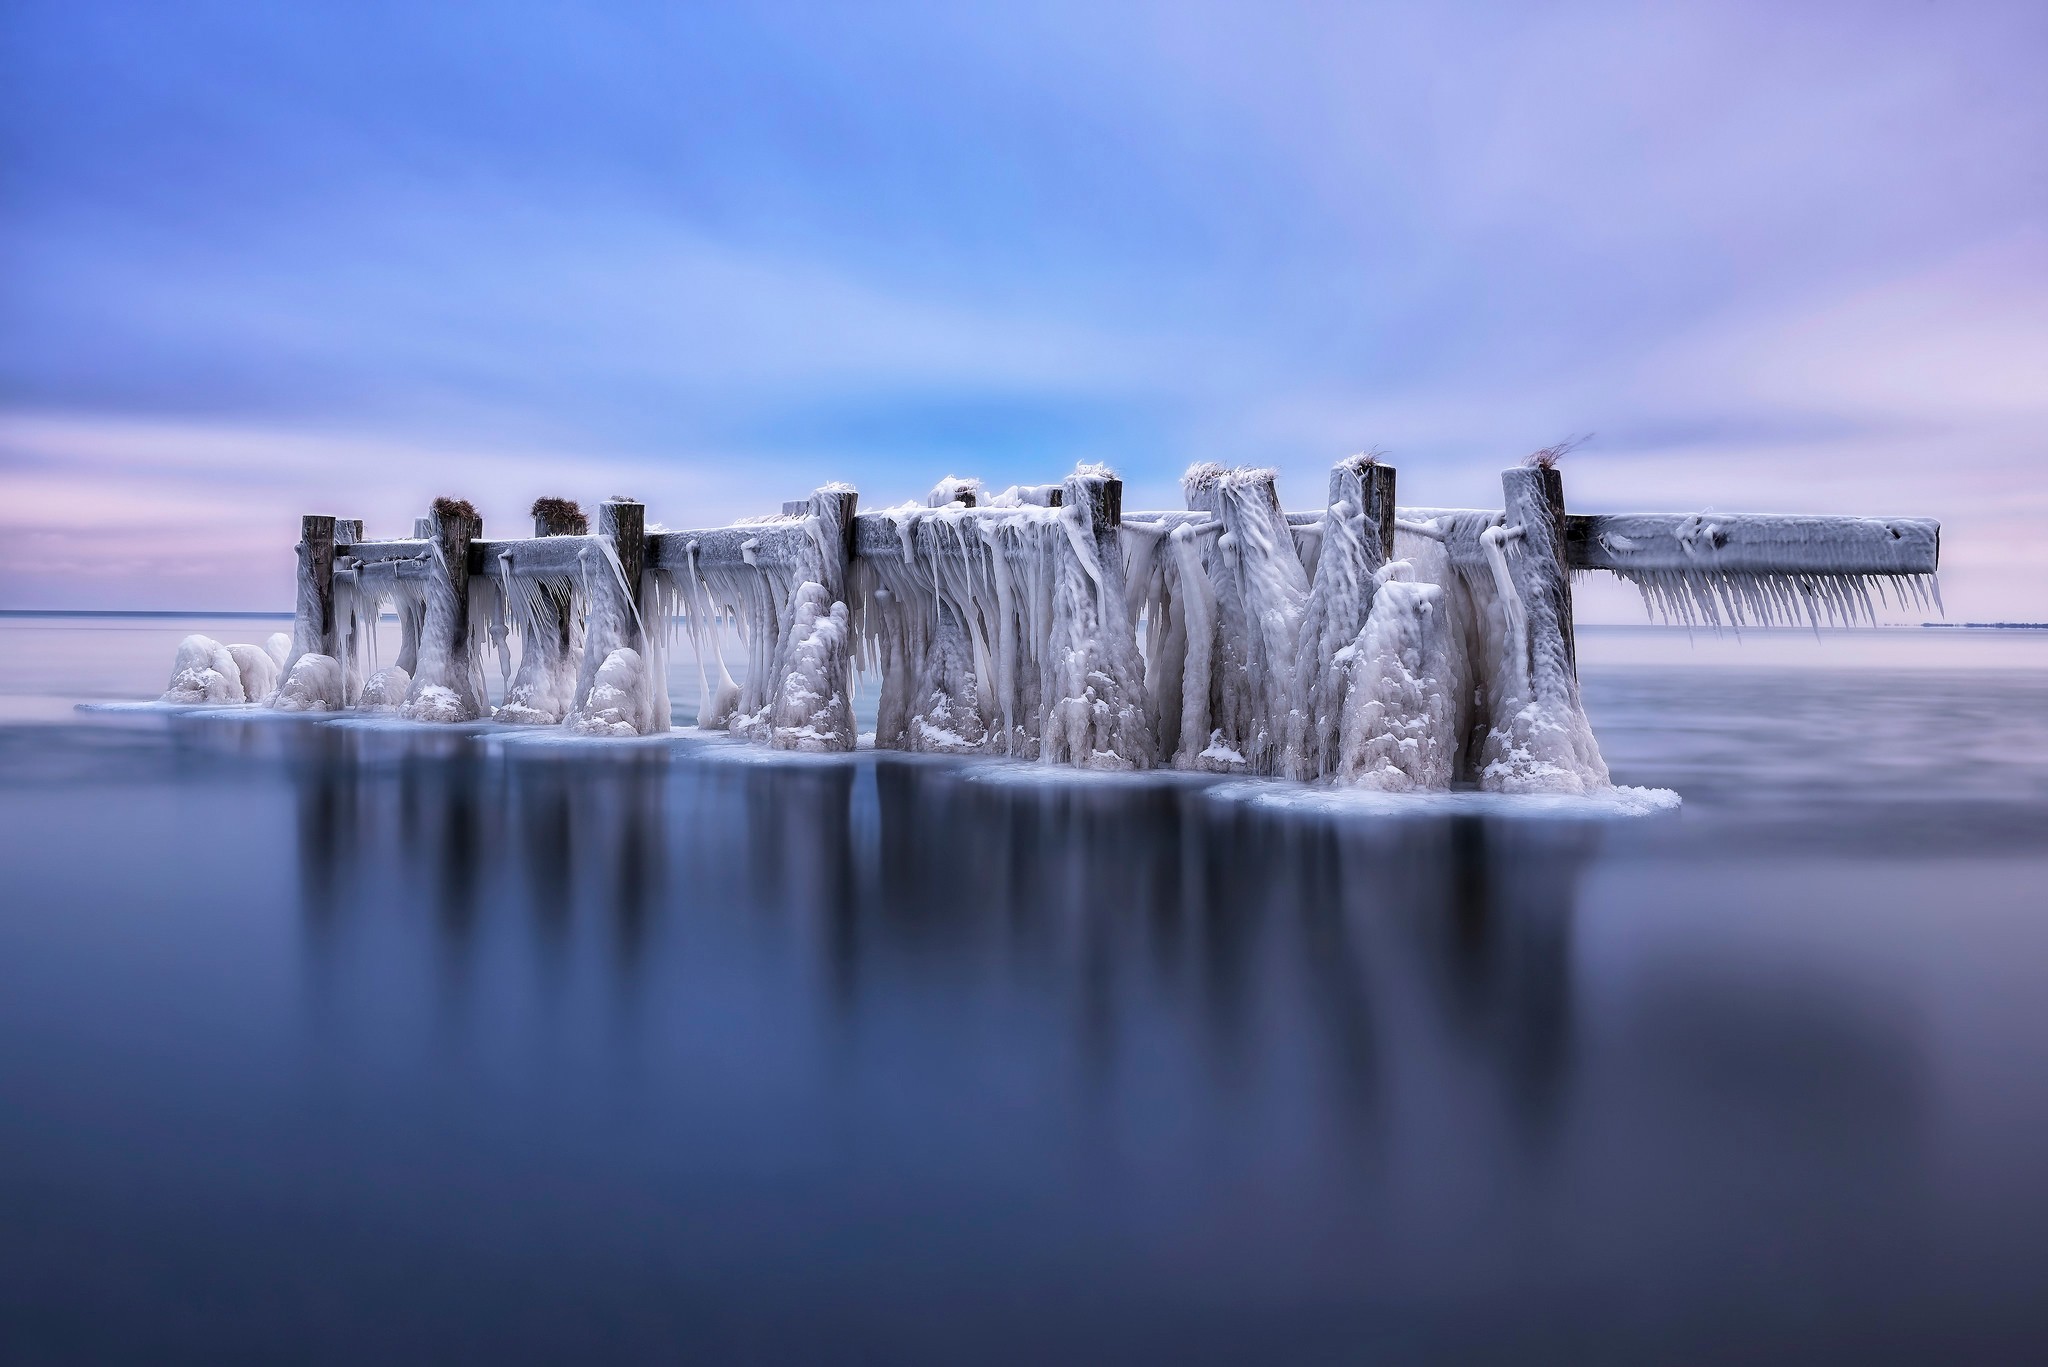 General 2048x1367 nature landscape winter snow ice water pier long exposure clouds reflection